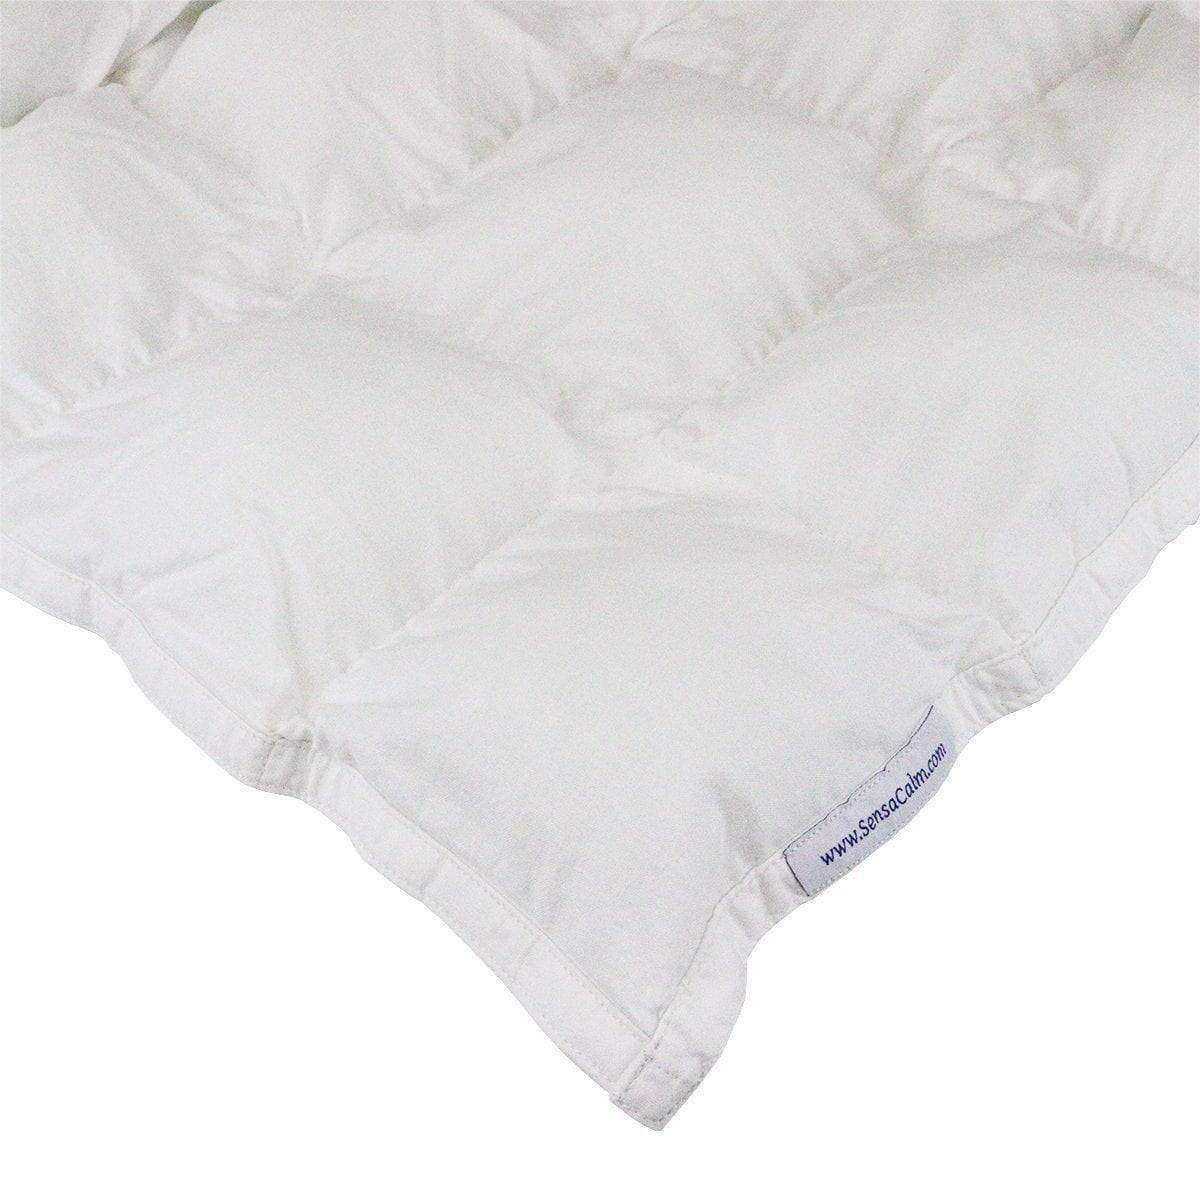 Clearance Weighted Blanket - King 20 lb White Cotton (110+ lb user)